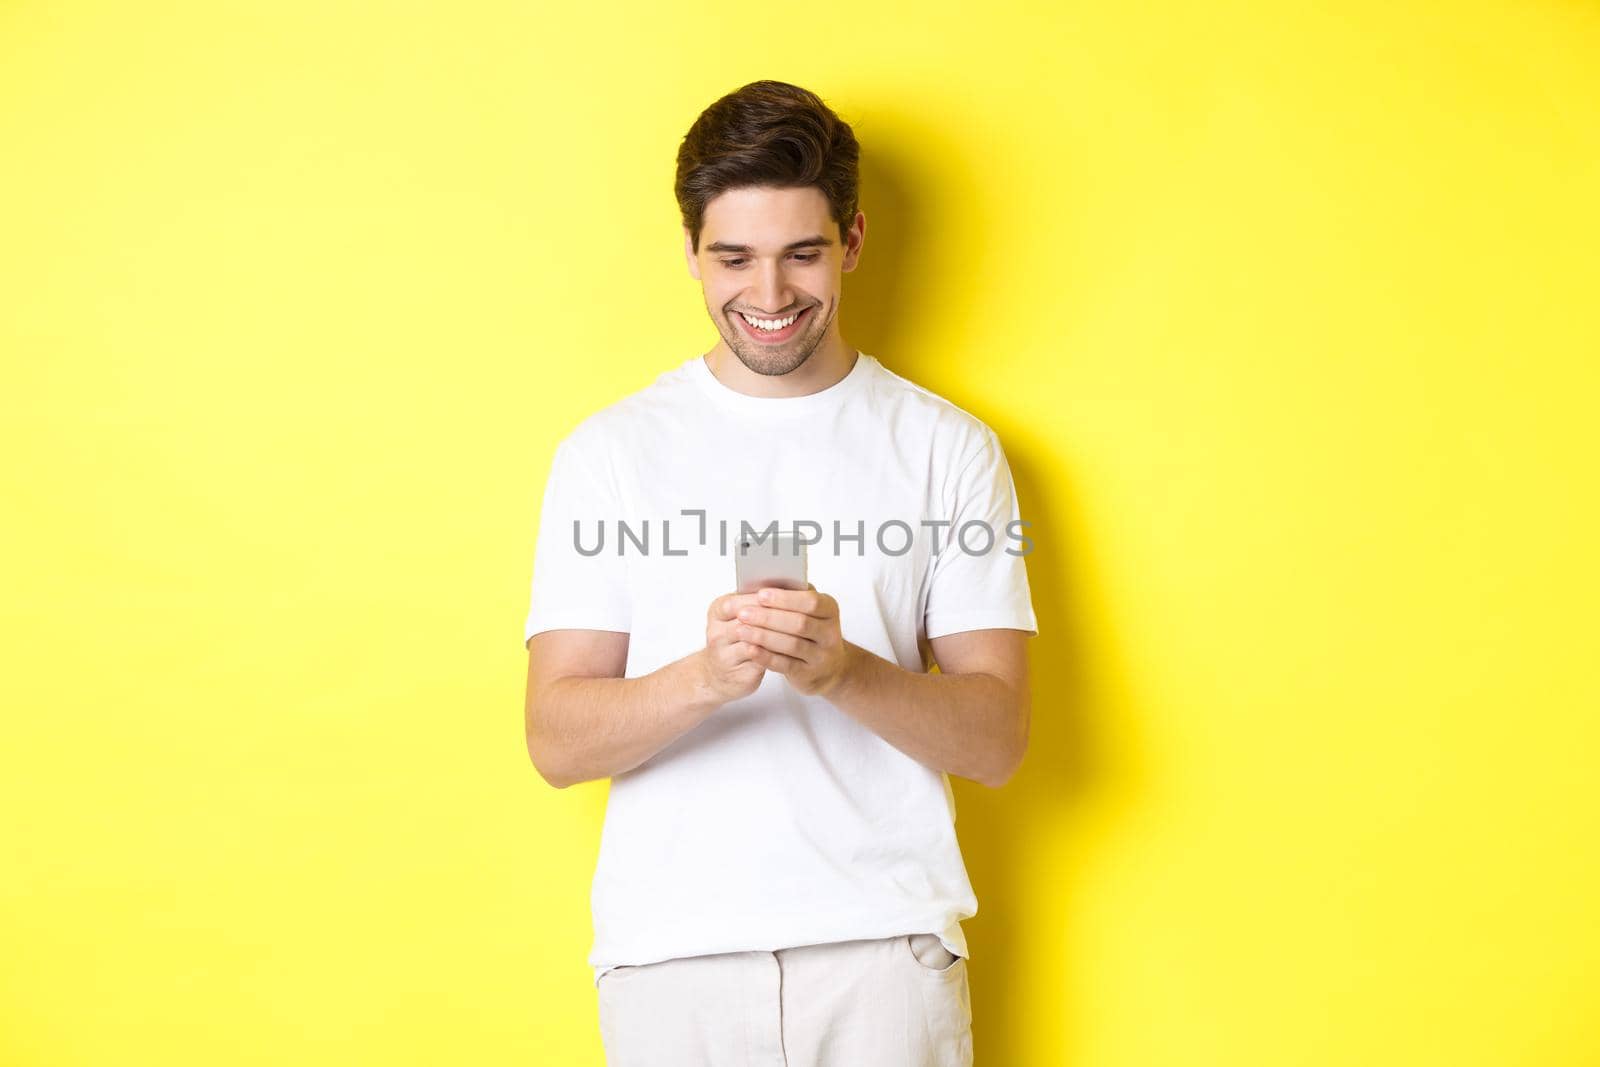 Young man reading text message on smartphone, looking at mobile phone screen and smiling, standing in white t-shirt against yellow background.